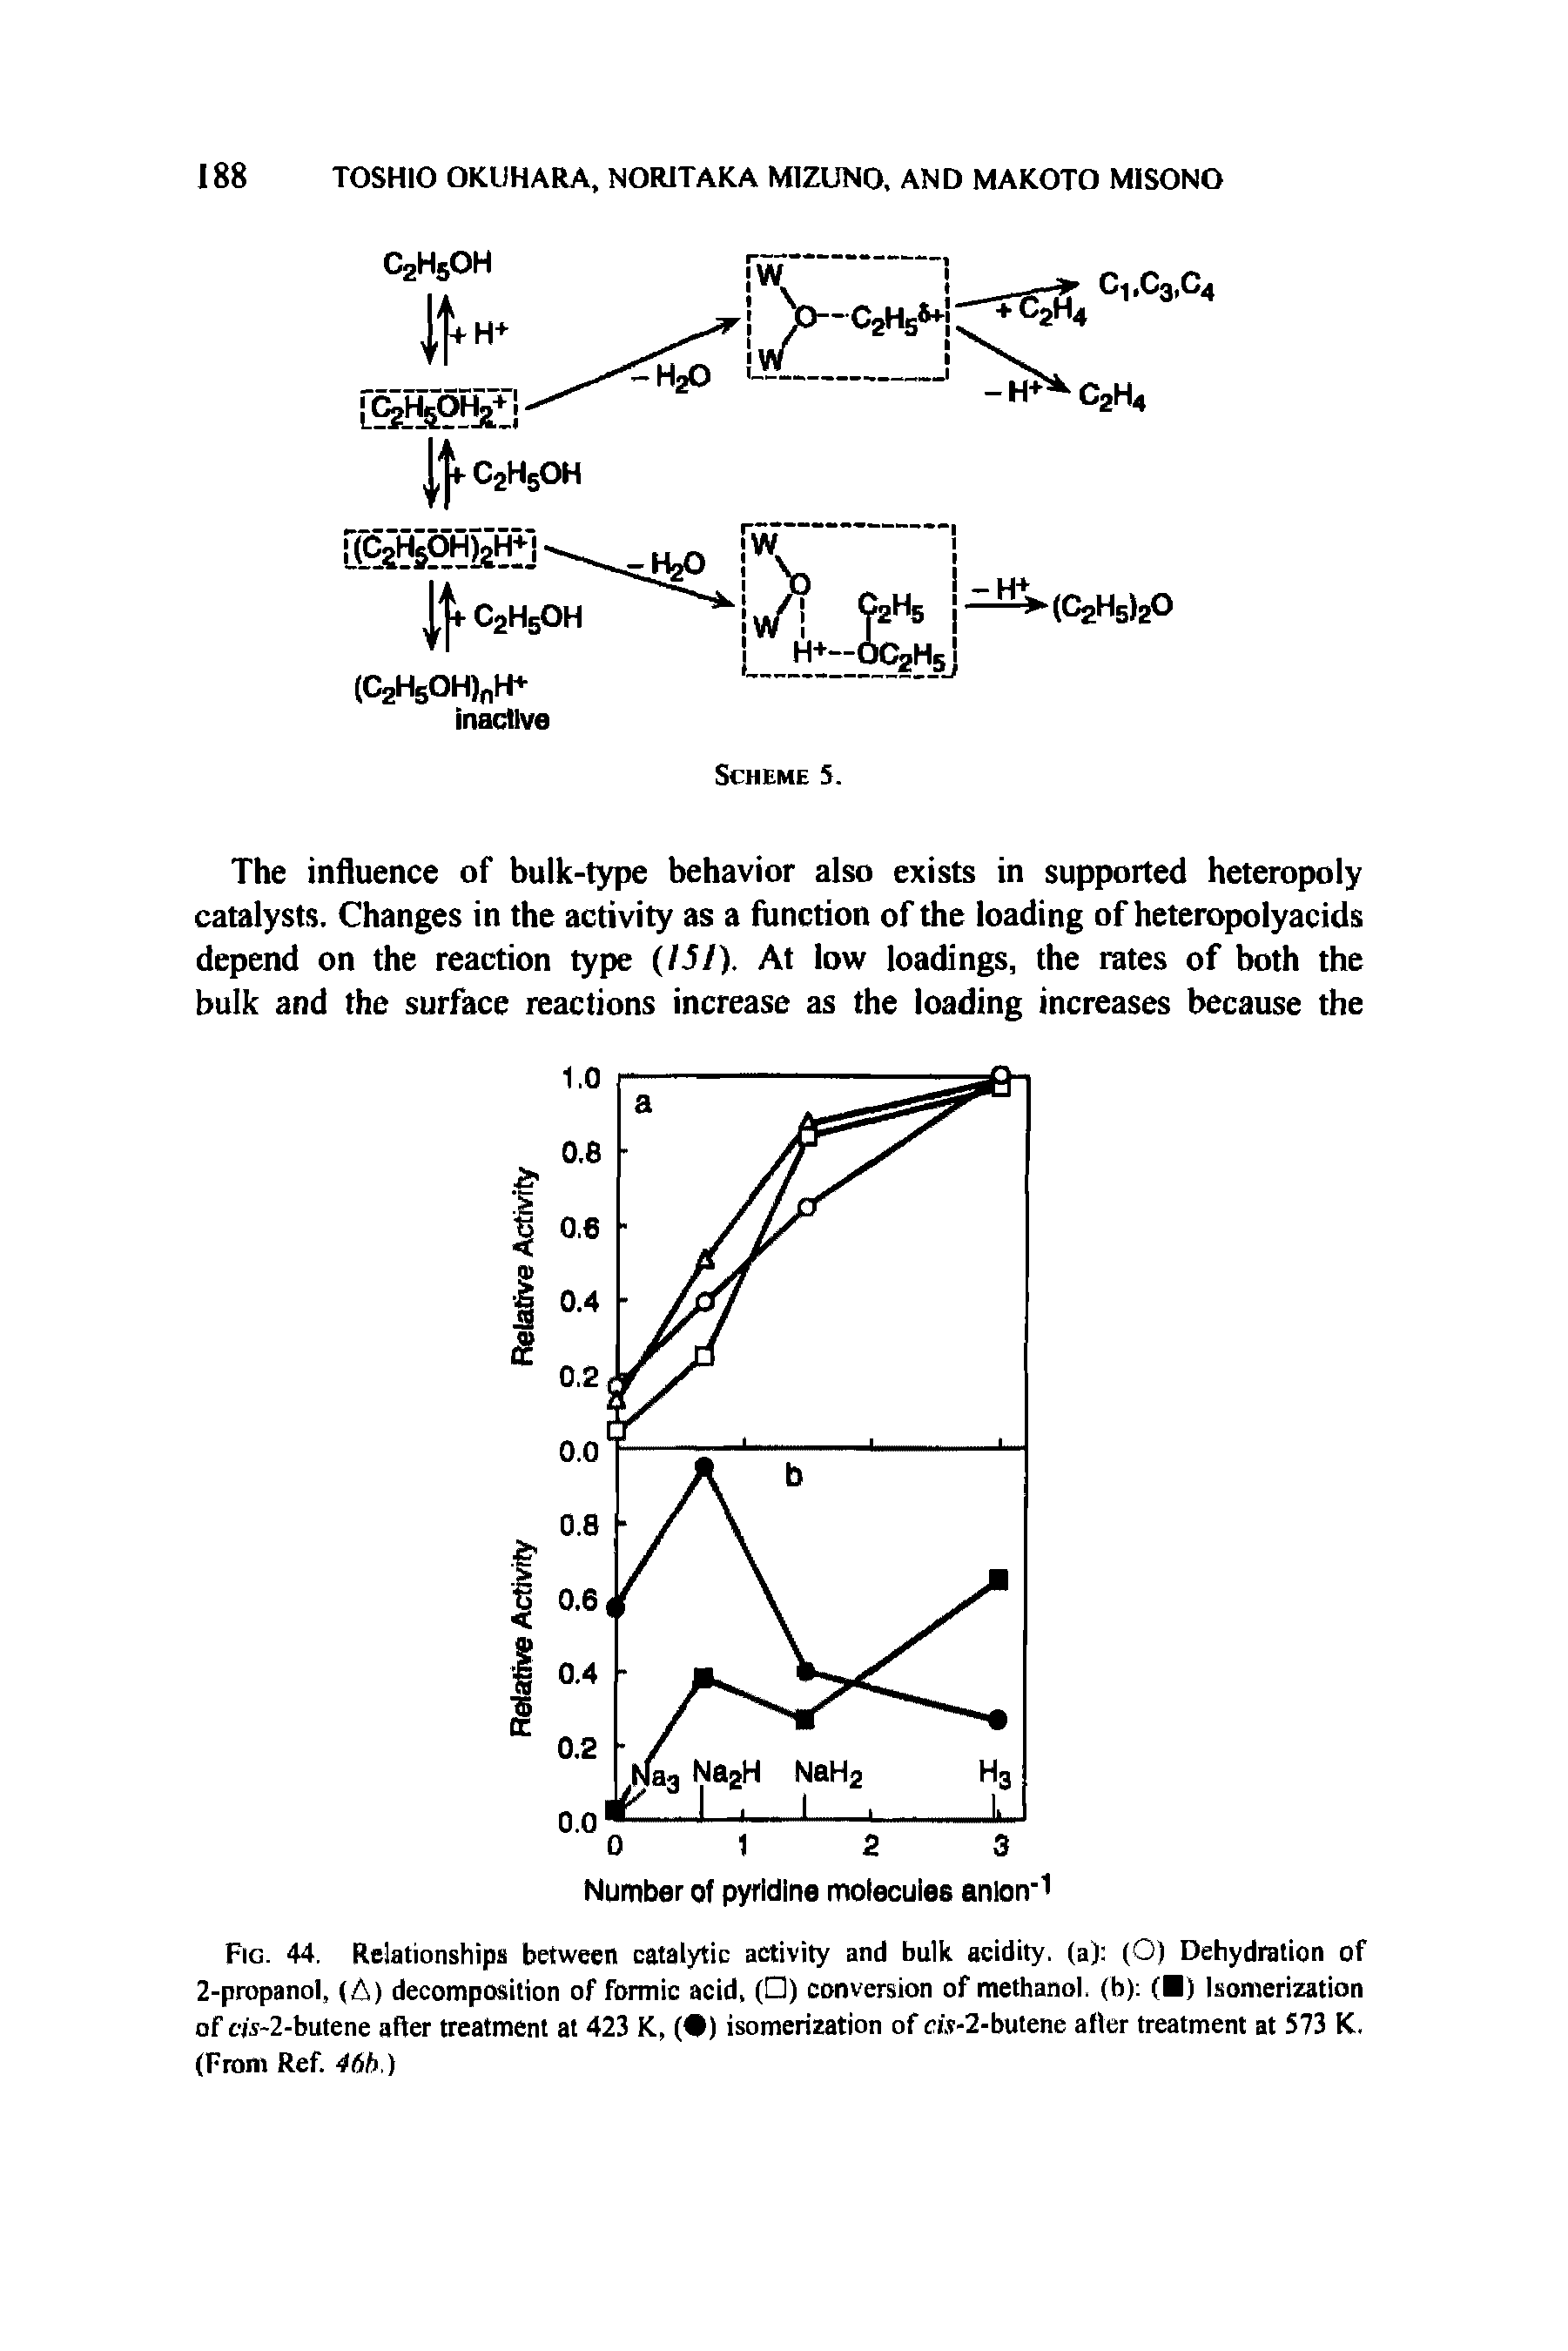 Fig. 44. Relationships between catalytic activity and bulk acidity, (a) (O) Dehydration of 2-propanol, (A) decomposition of formic acid, ( ) conversion of methanol, (ta) ( ) Isomerization of cjs-2-butene after treatment at 423 K, ( ) isomerization of m-2-butene after treatment at 573 K. (From Ref. 46b.)...